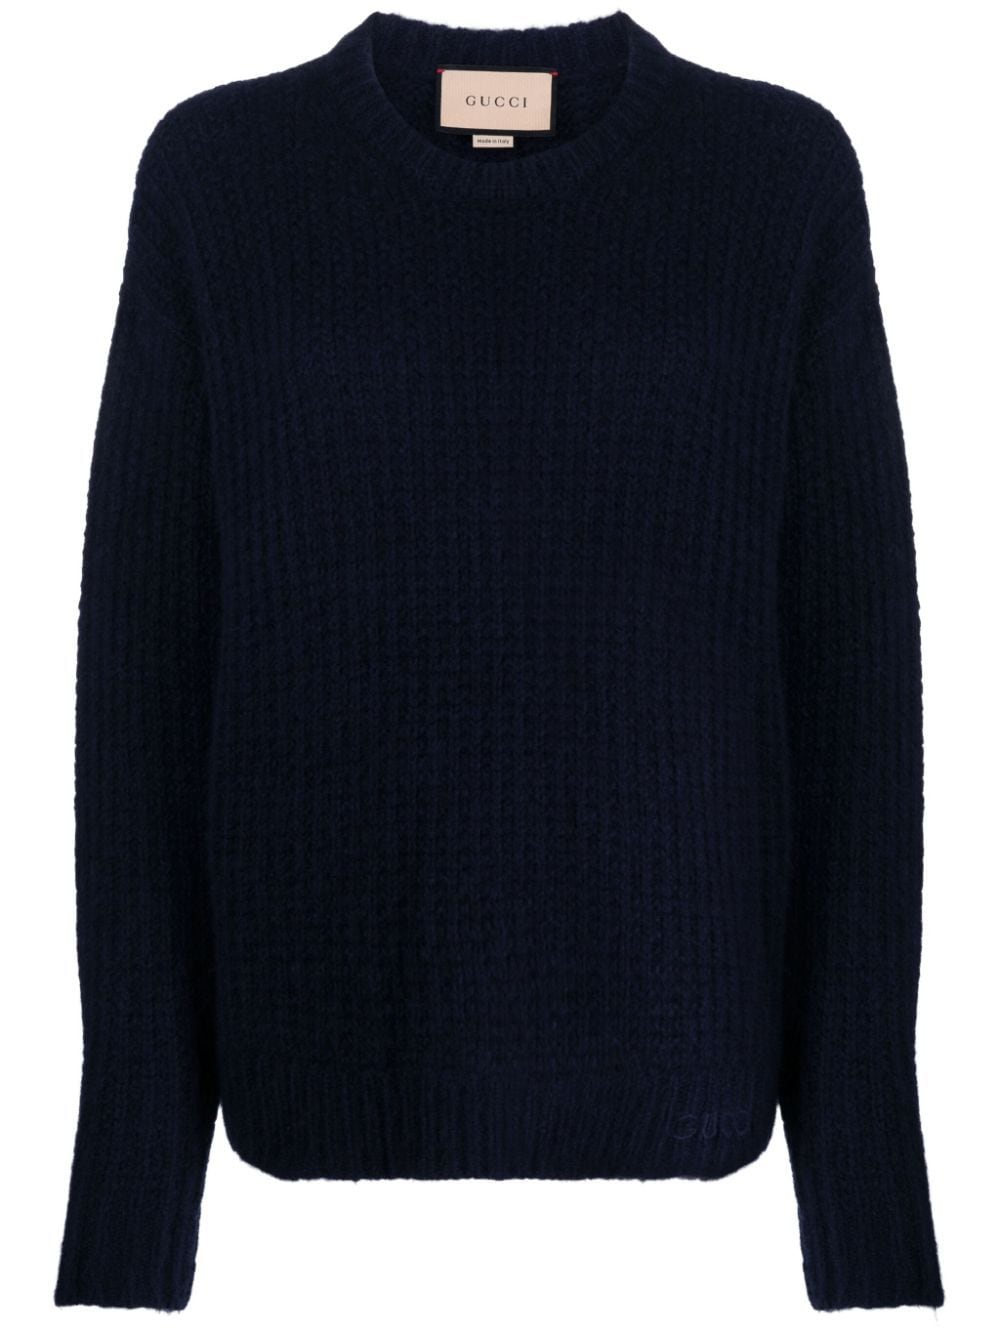 Gucci logo-embroidered knitted cashmere jumper - Blau